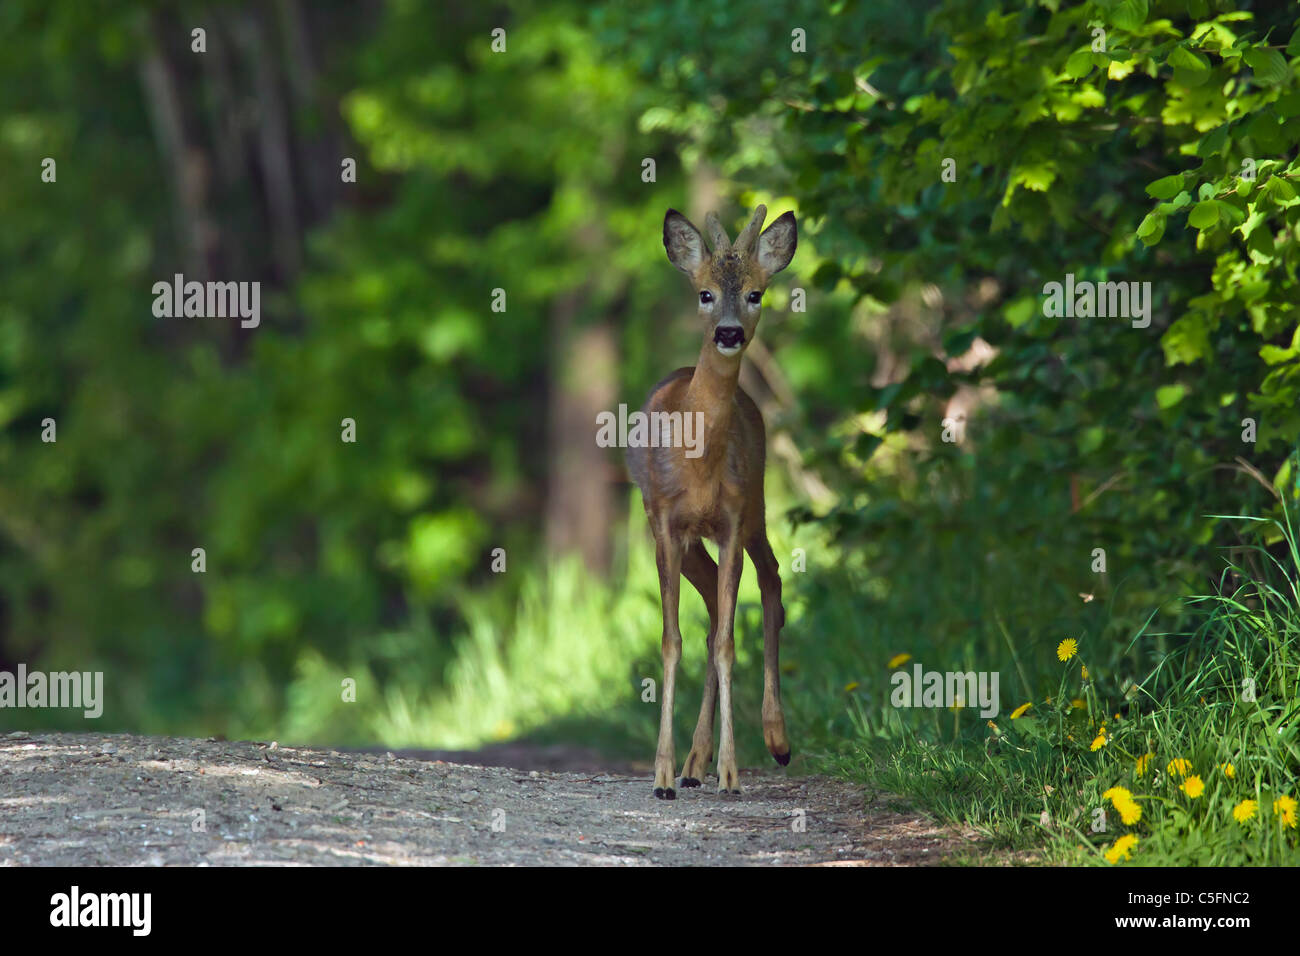 Roe deer (Capreolus capreolus), young buck with antlers covered in velvet on path in forest in spring, Germany Stock Photo